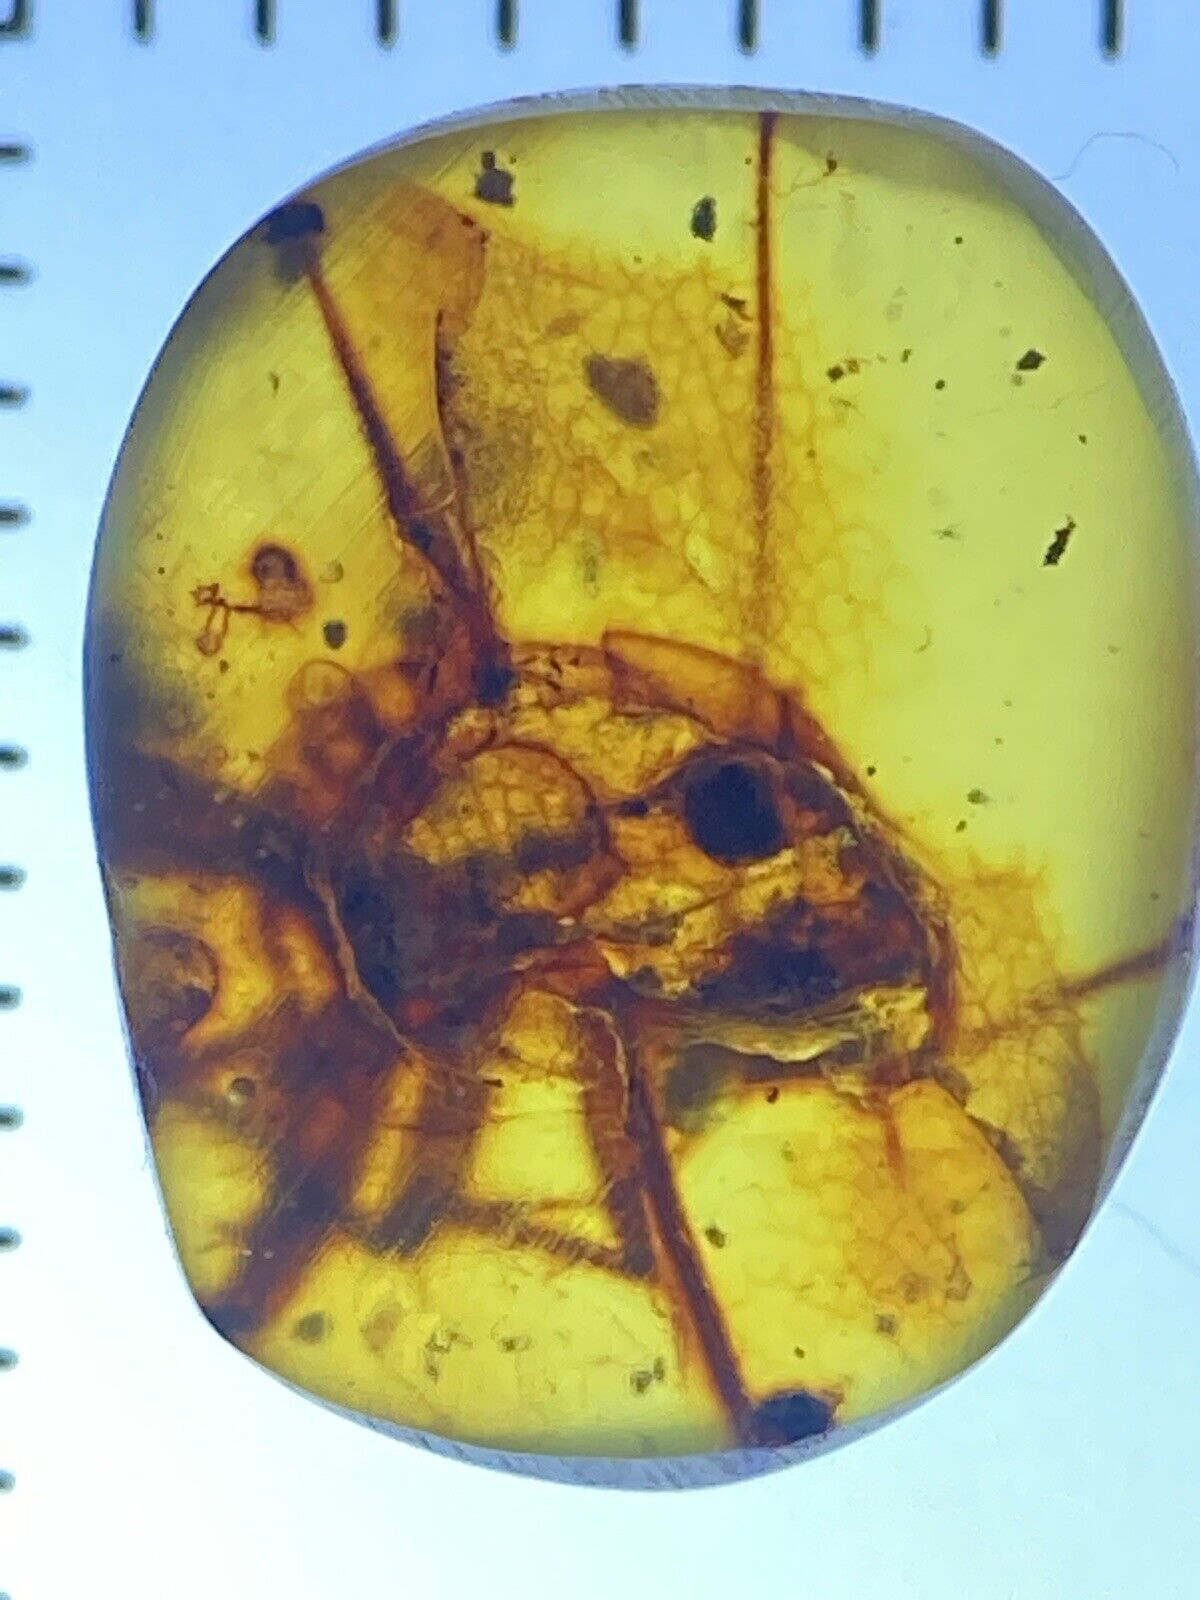 Remains Of A Roach - Cockroach Fossil Inclusion, In Genuine Burmite Amber, 98MYO